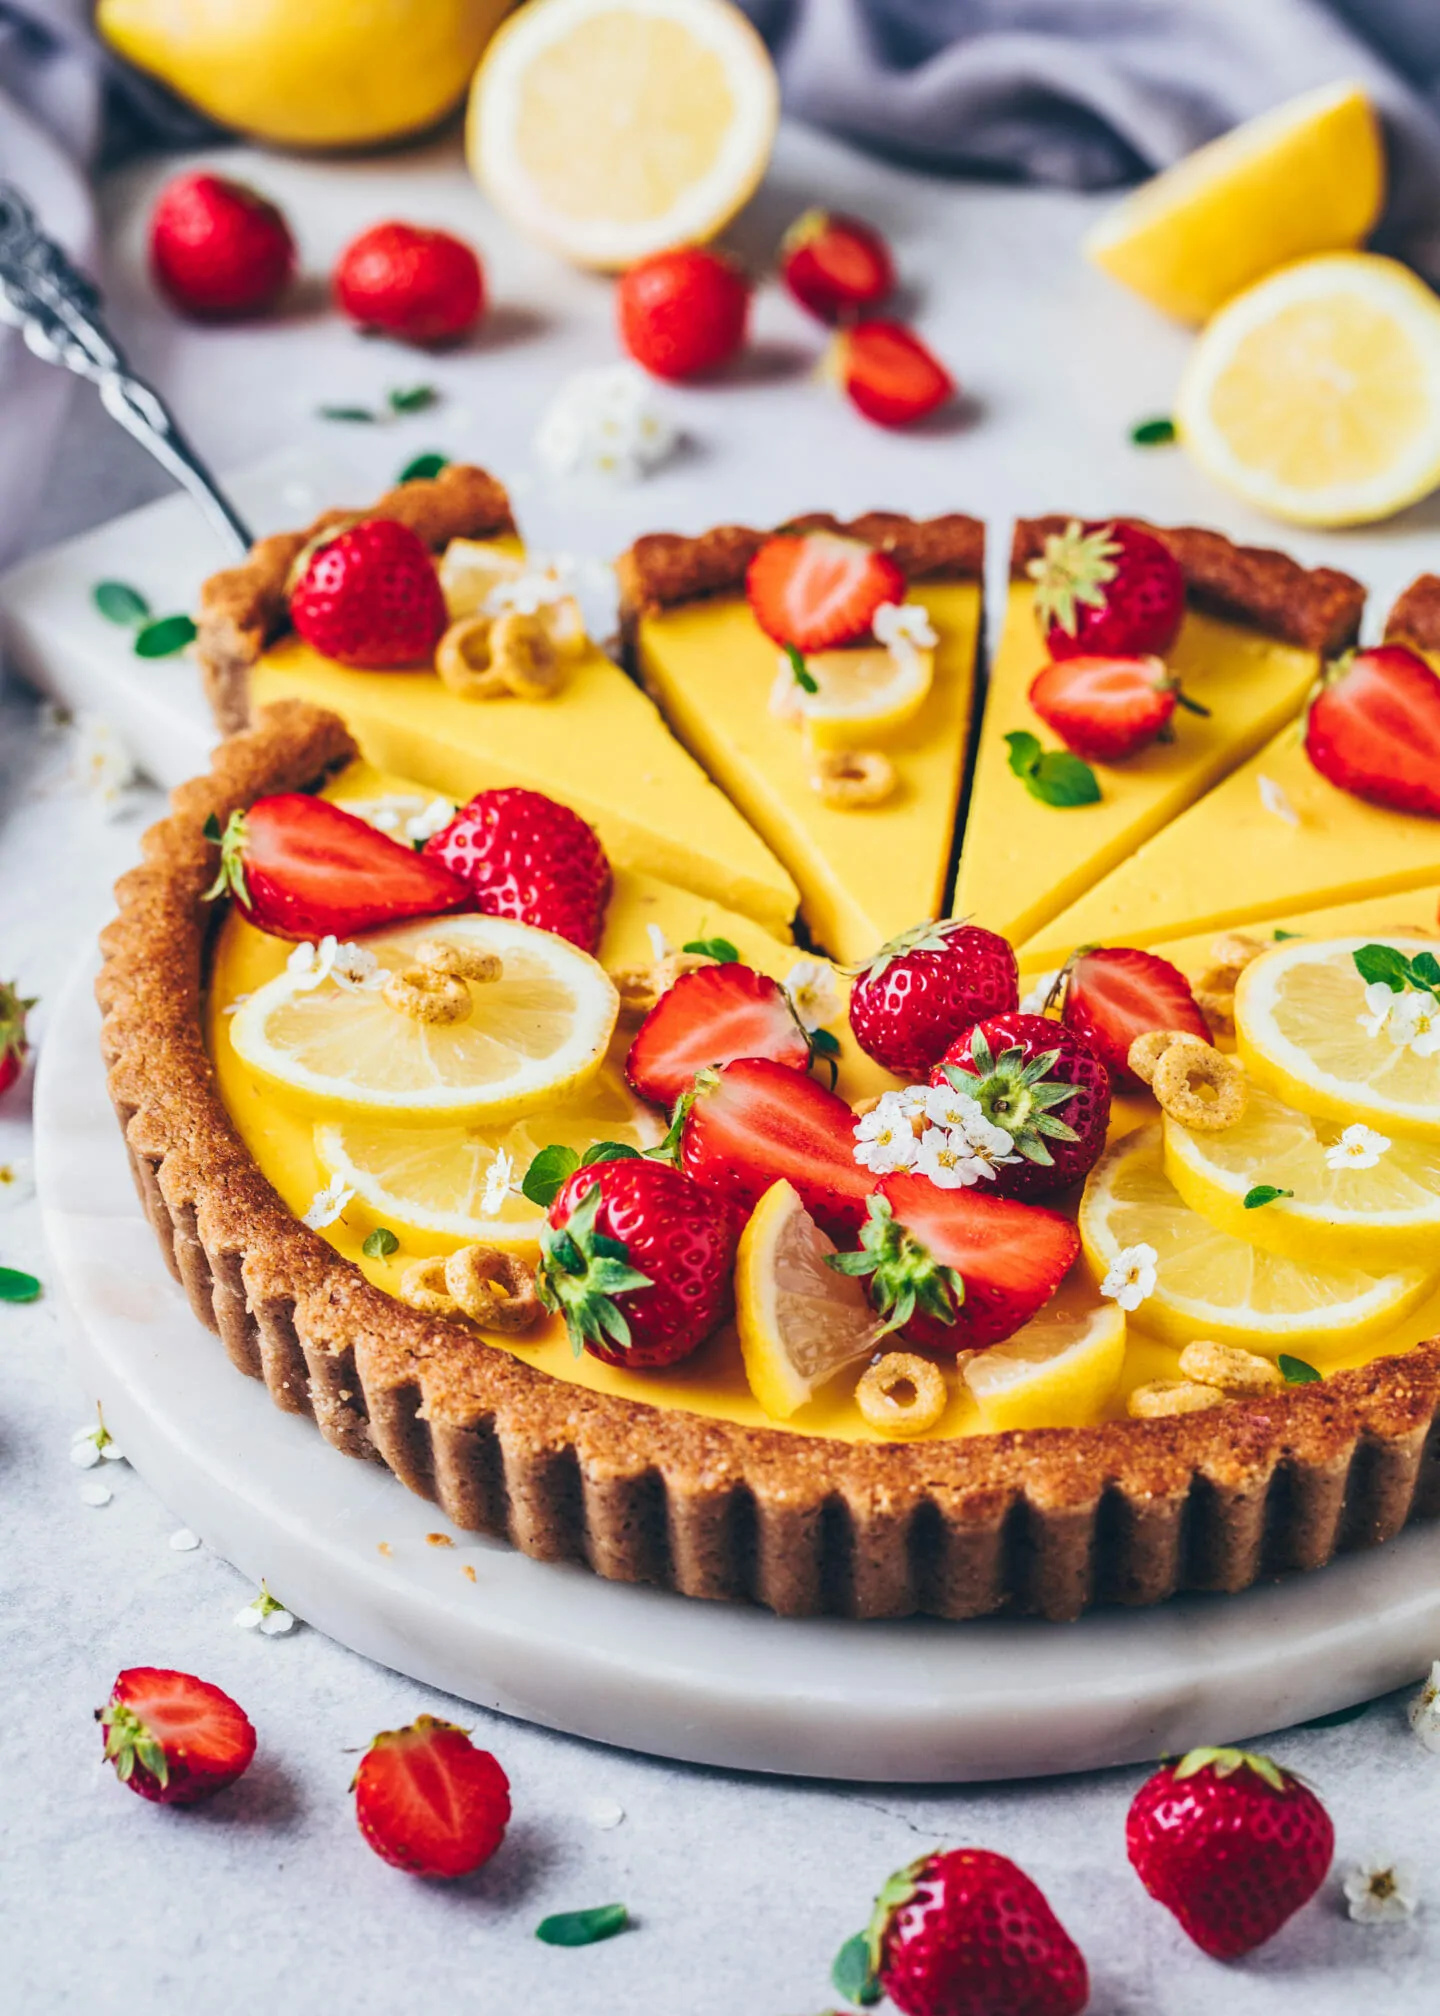 Tart: Fillings can be cooked or uncooked, depending on the recipe. 1440x2020 HD Wallpaper.